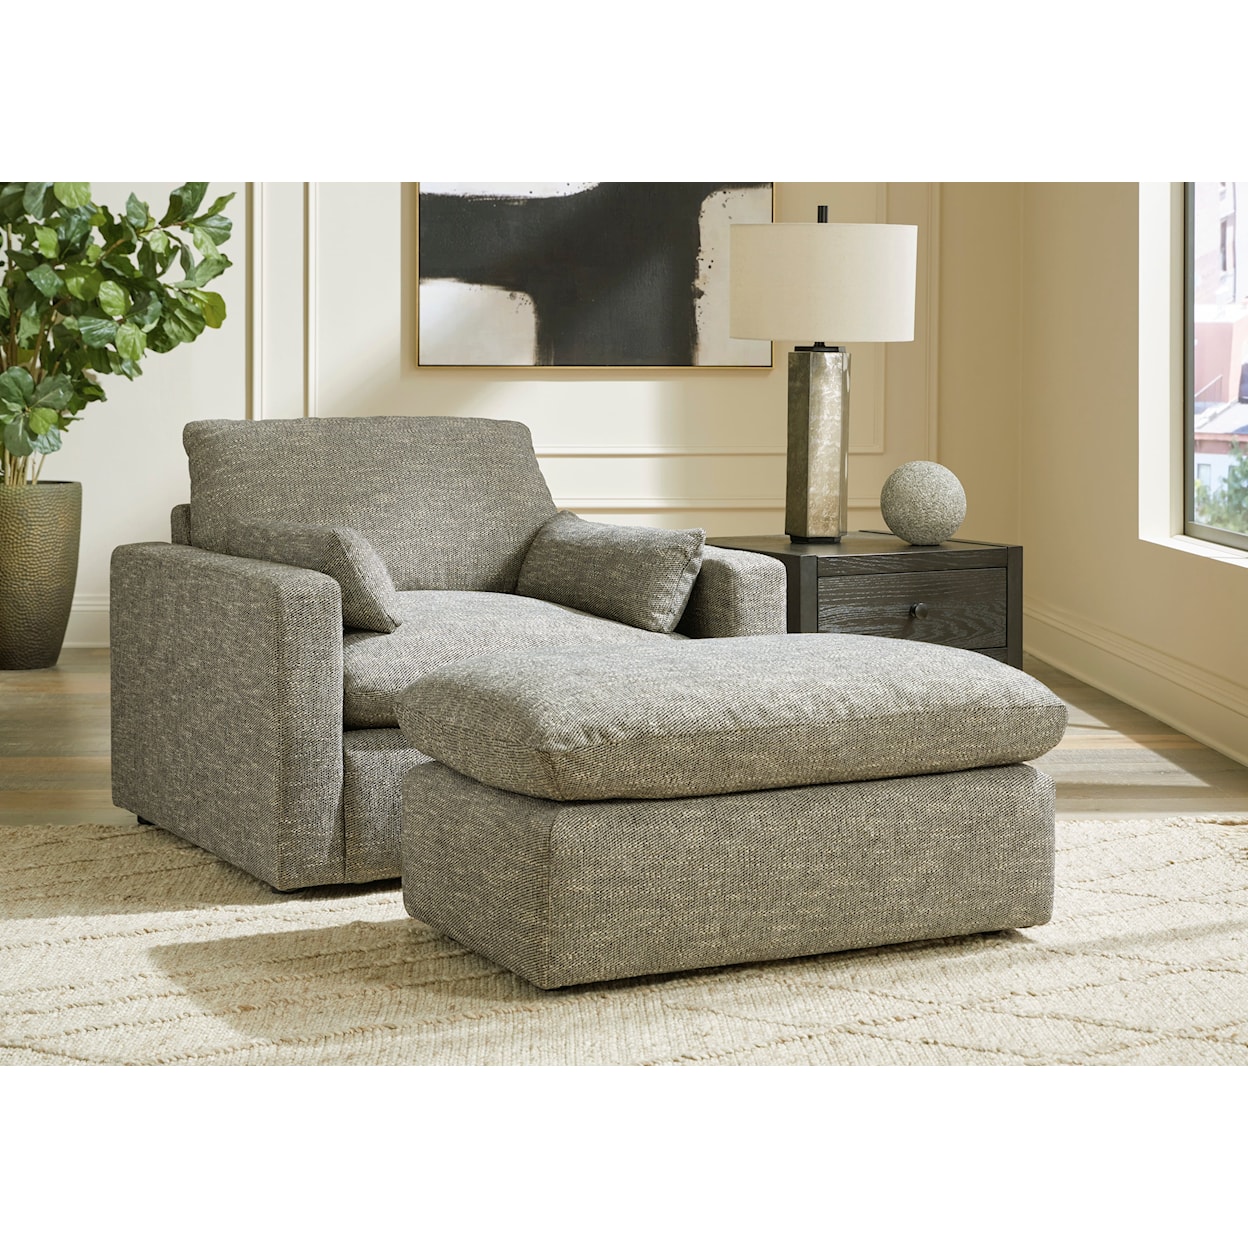 Benchcraft by Ashley Dramatic Oversized Chair and Ottoman